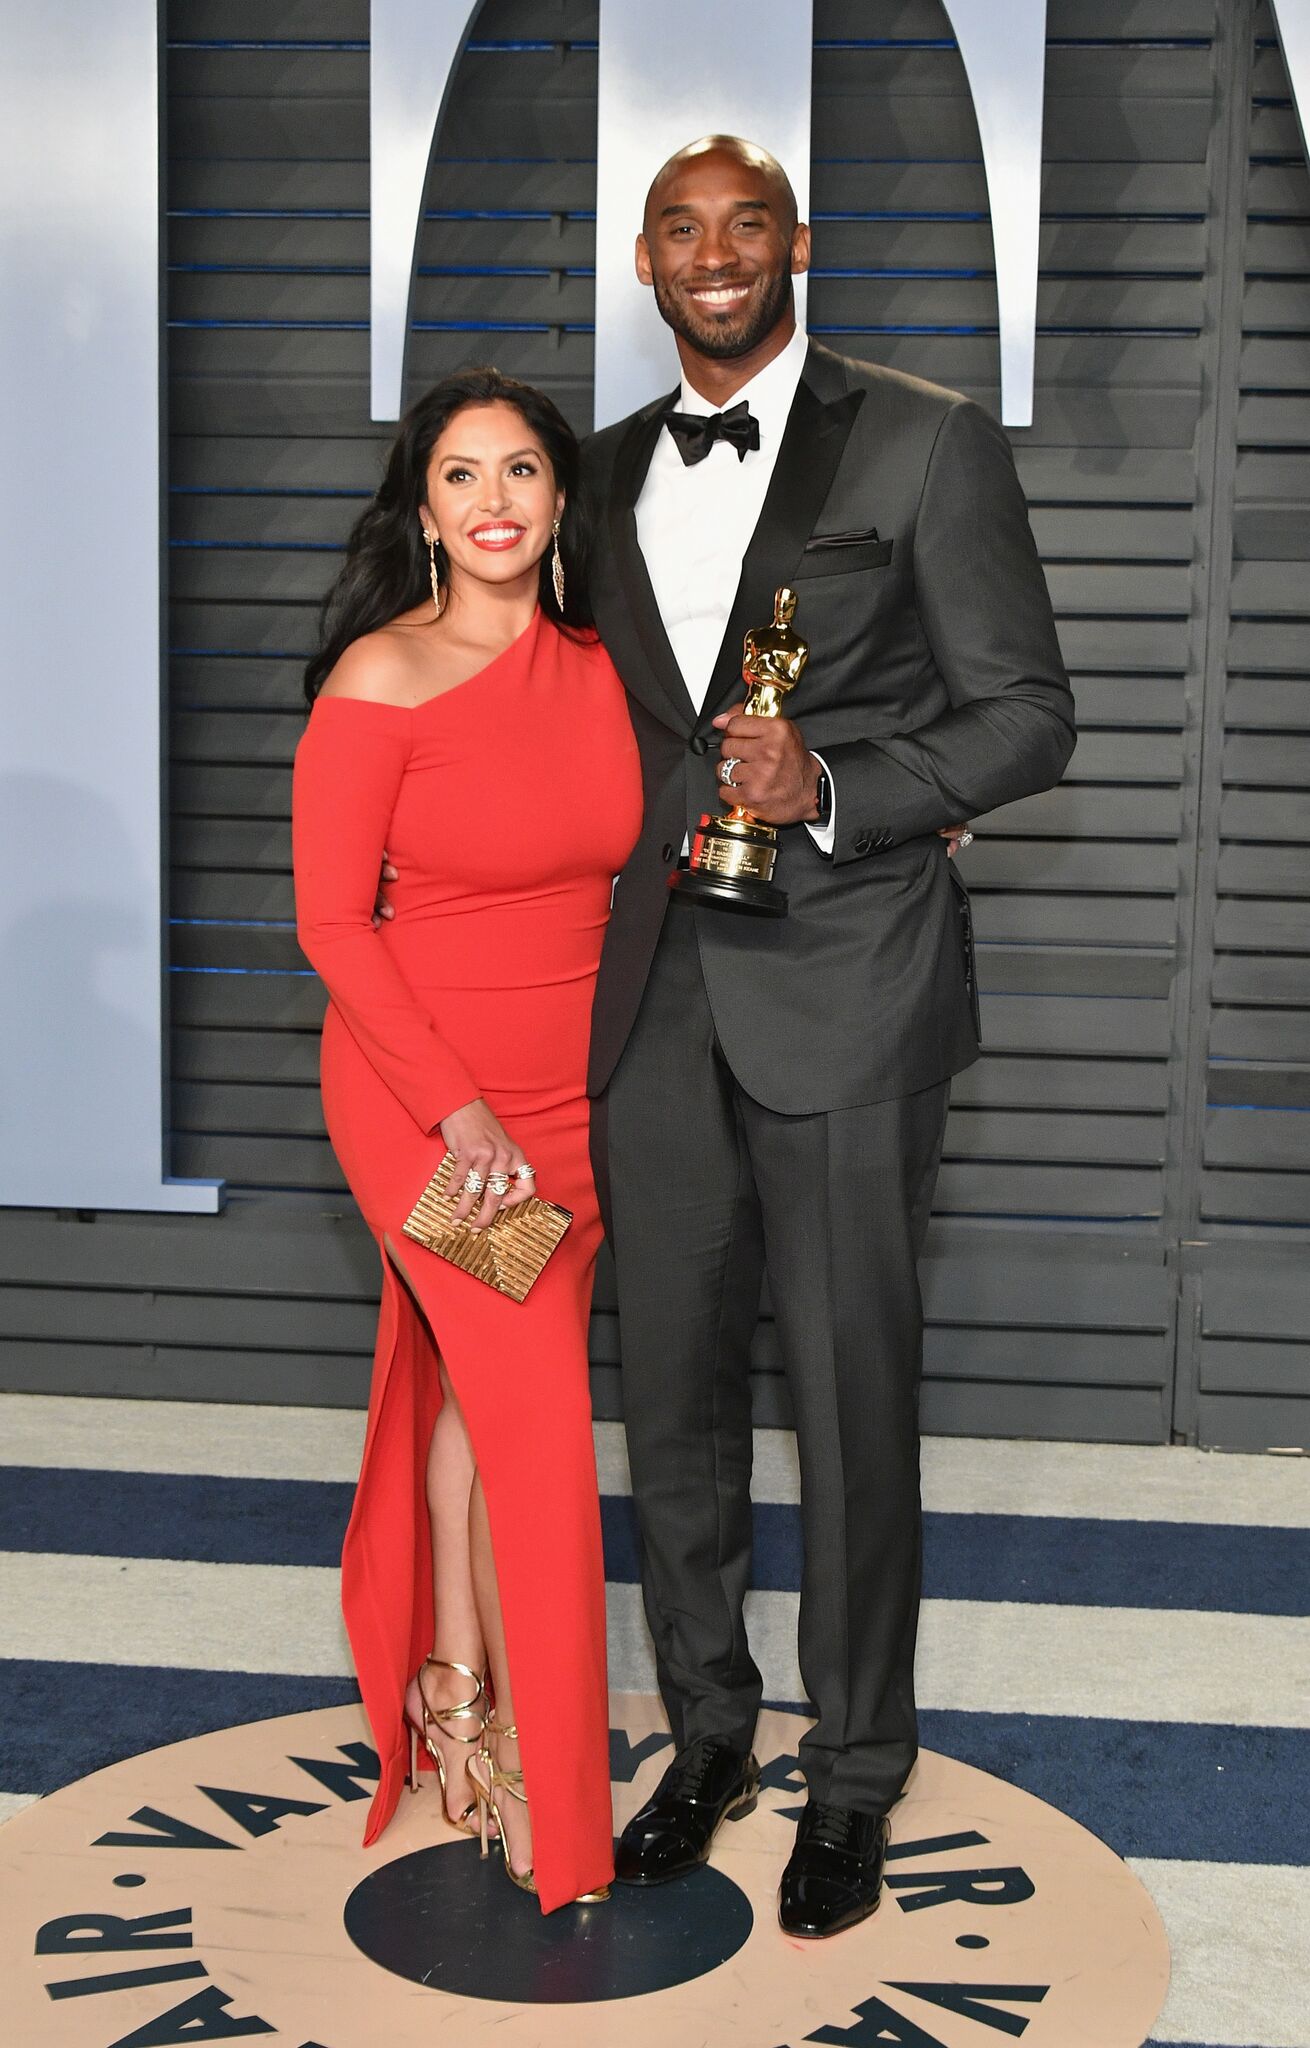 Vanessa Bryant (L) and Kobe Bryant attend the 2018 Vanity Fair Oscar Party hosted by Radhika Jones at Wallis Annenberg Center | Getty Images